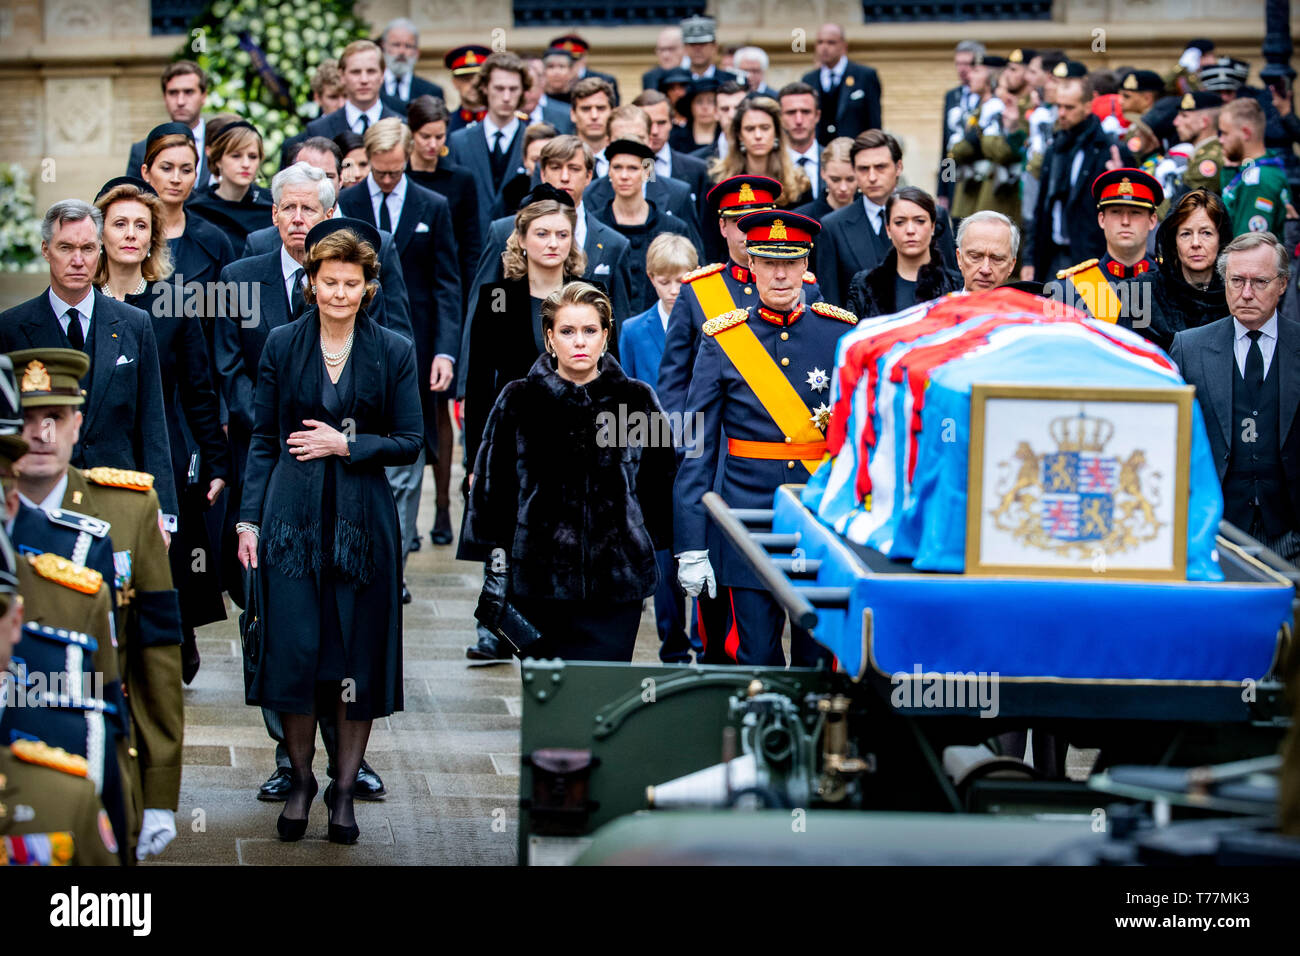 Grand Duke Henri, Grand Duchess Maria Teresa, Prince Guillaume, Prince Jean, Arch Duchess Marie Astrid and Princess Margaretha of Luxembourg at Funeral of Grand Duke Jean at the Cathedral in Luxembourg, 4 May 2019. Photo: Patrick van Katwijk | Stock Photo